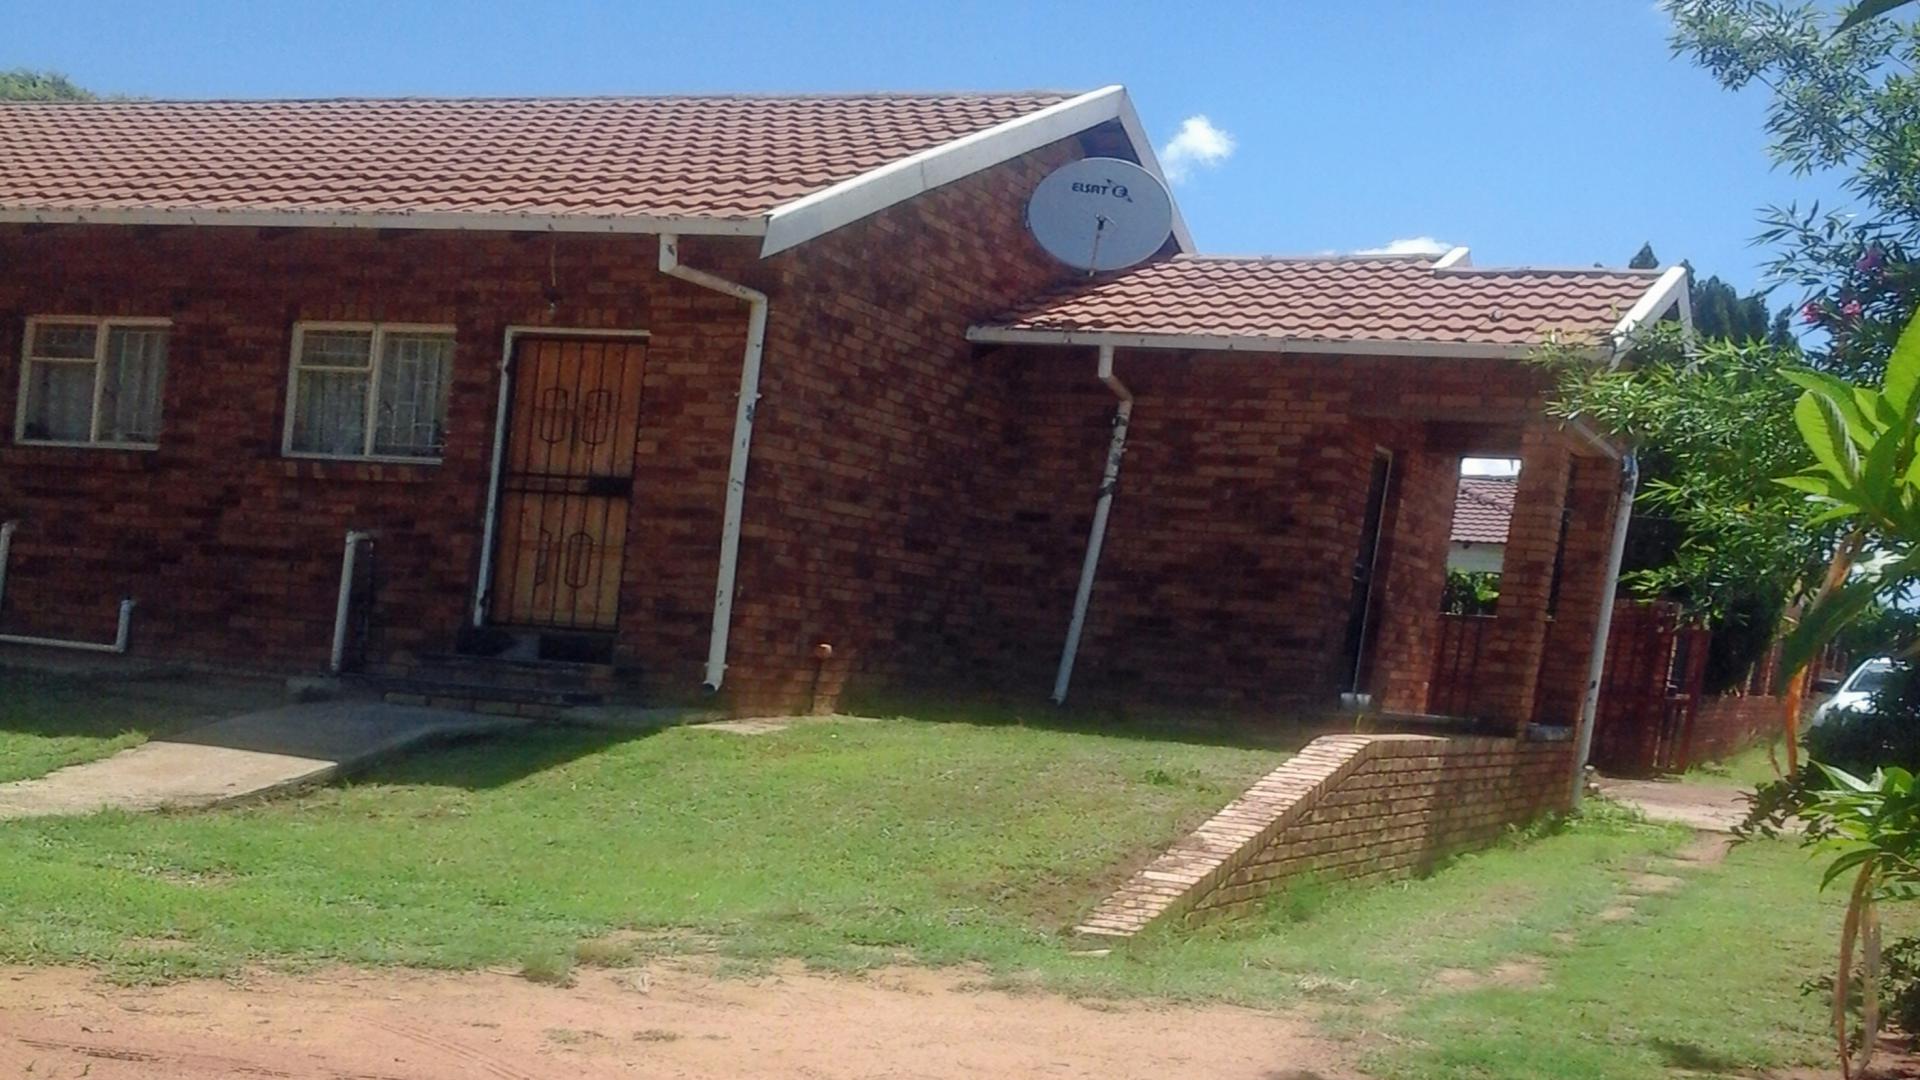 Kitchen - 11 square meters of property in KwaMhlanga